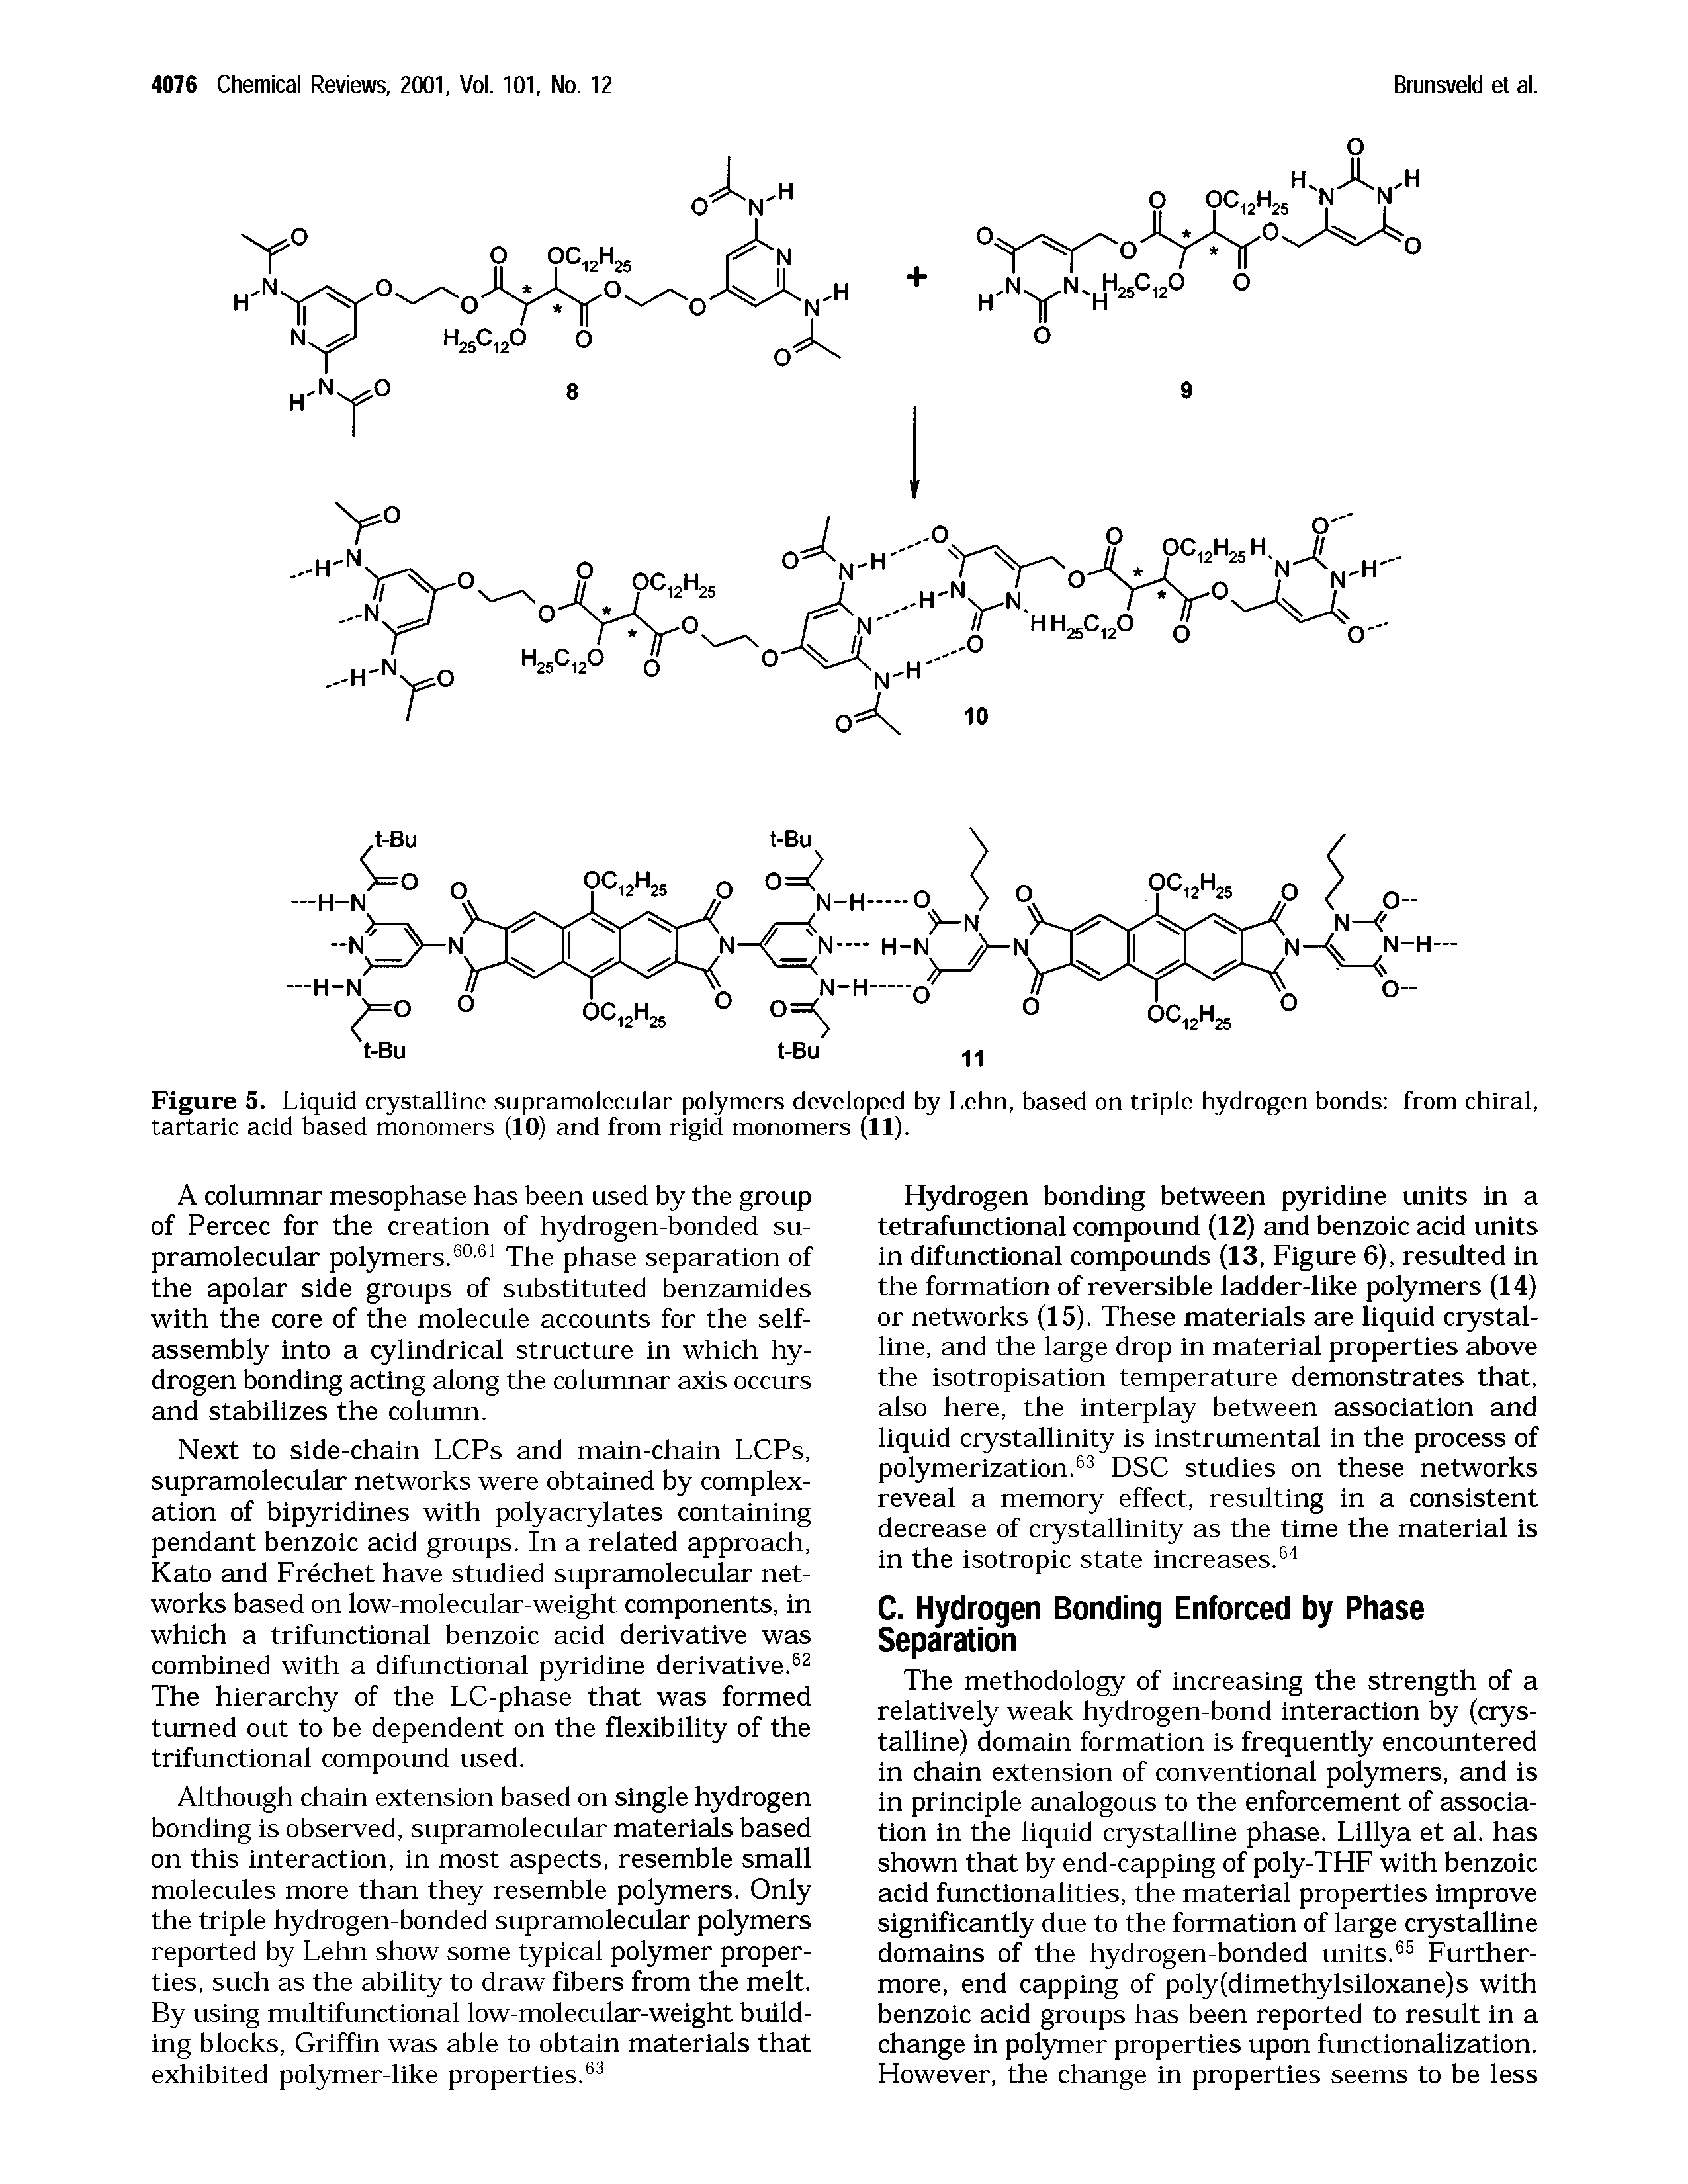 Figure 5. Liquid crystalline supramolecular polymers developed by Lehn, based on triple hydrogen bonds from chiral, tartaric acid based monomers (10) and from rigid monomers (11).